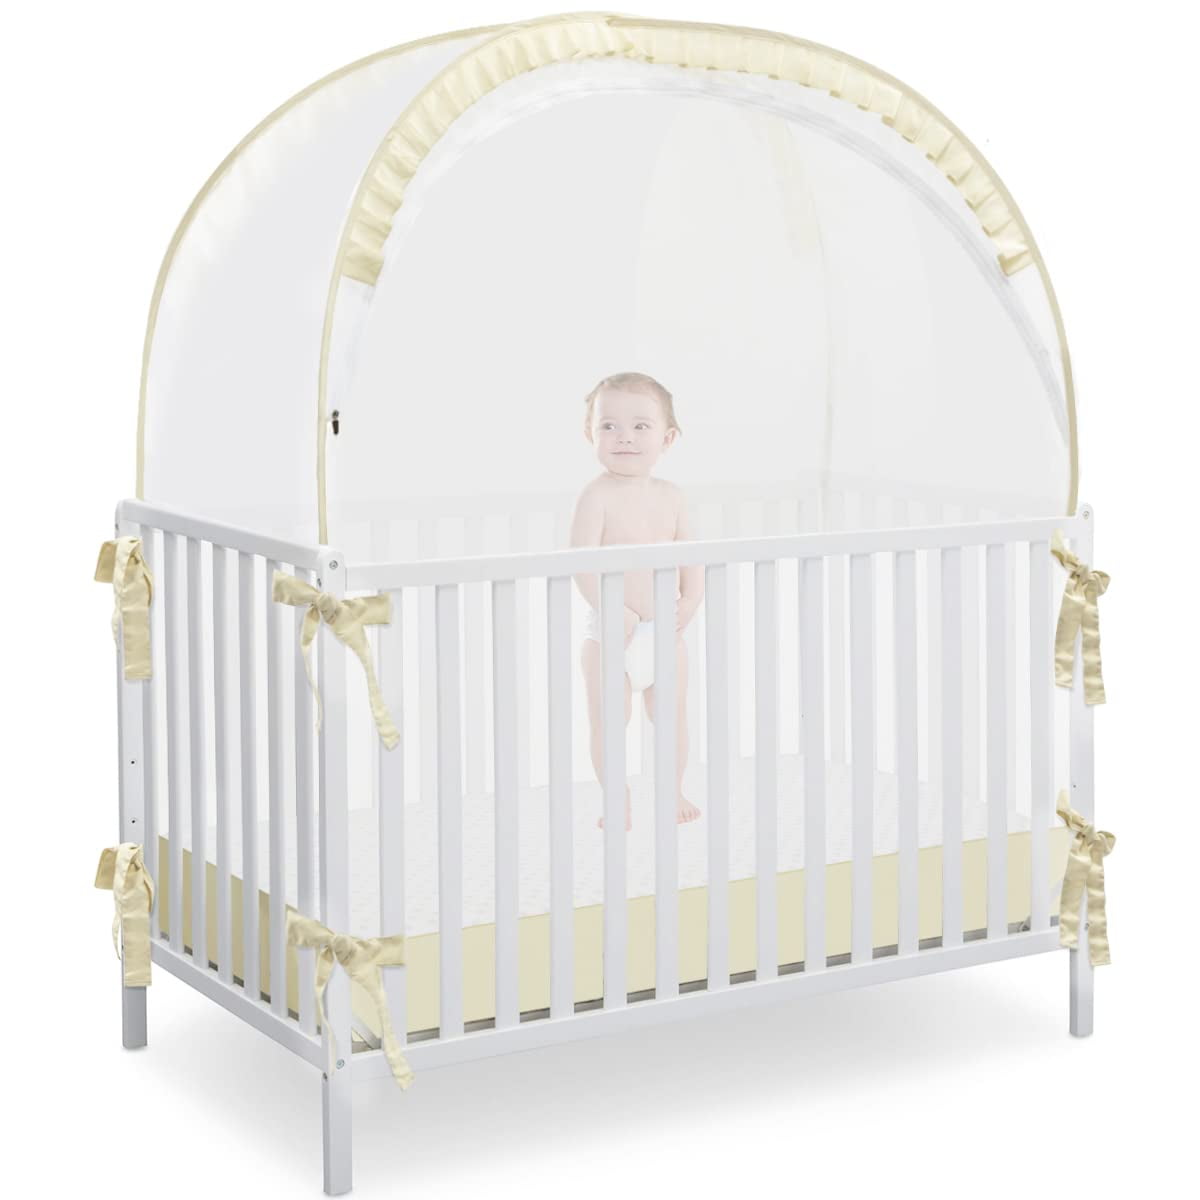 Baby Toddler Infant Newborn Crib Tent Mosquito Net Safety Canopy Cover White Net 